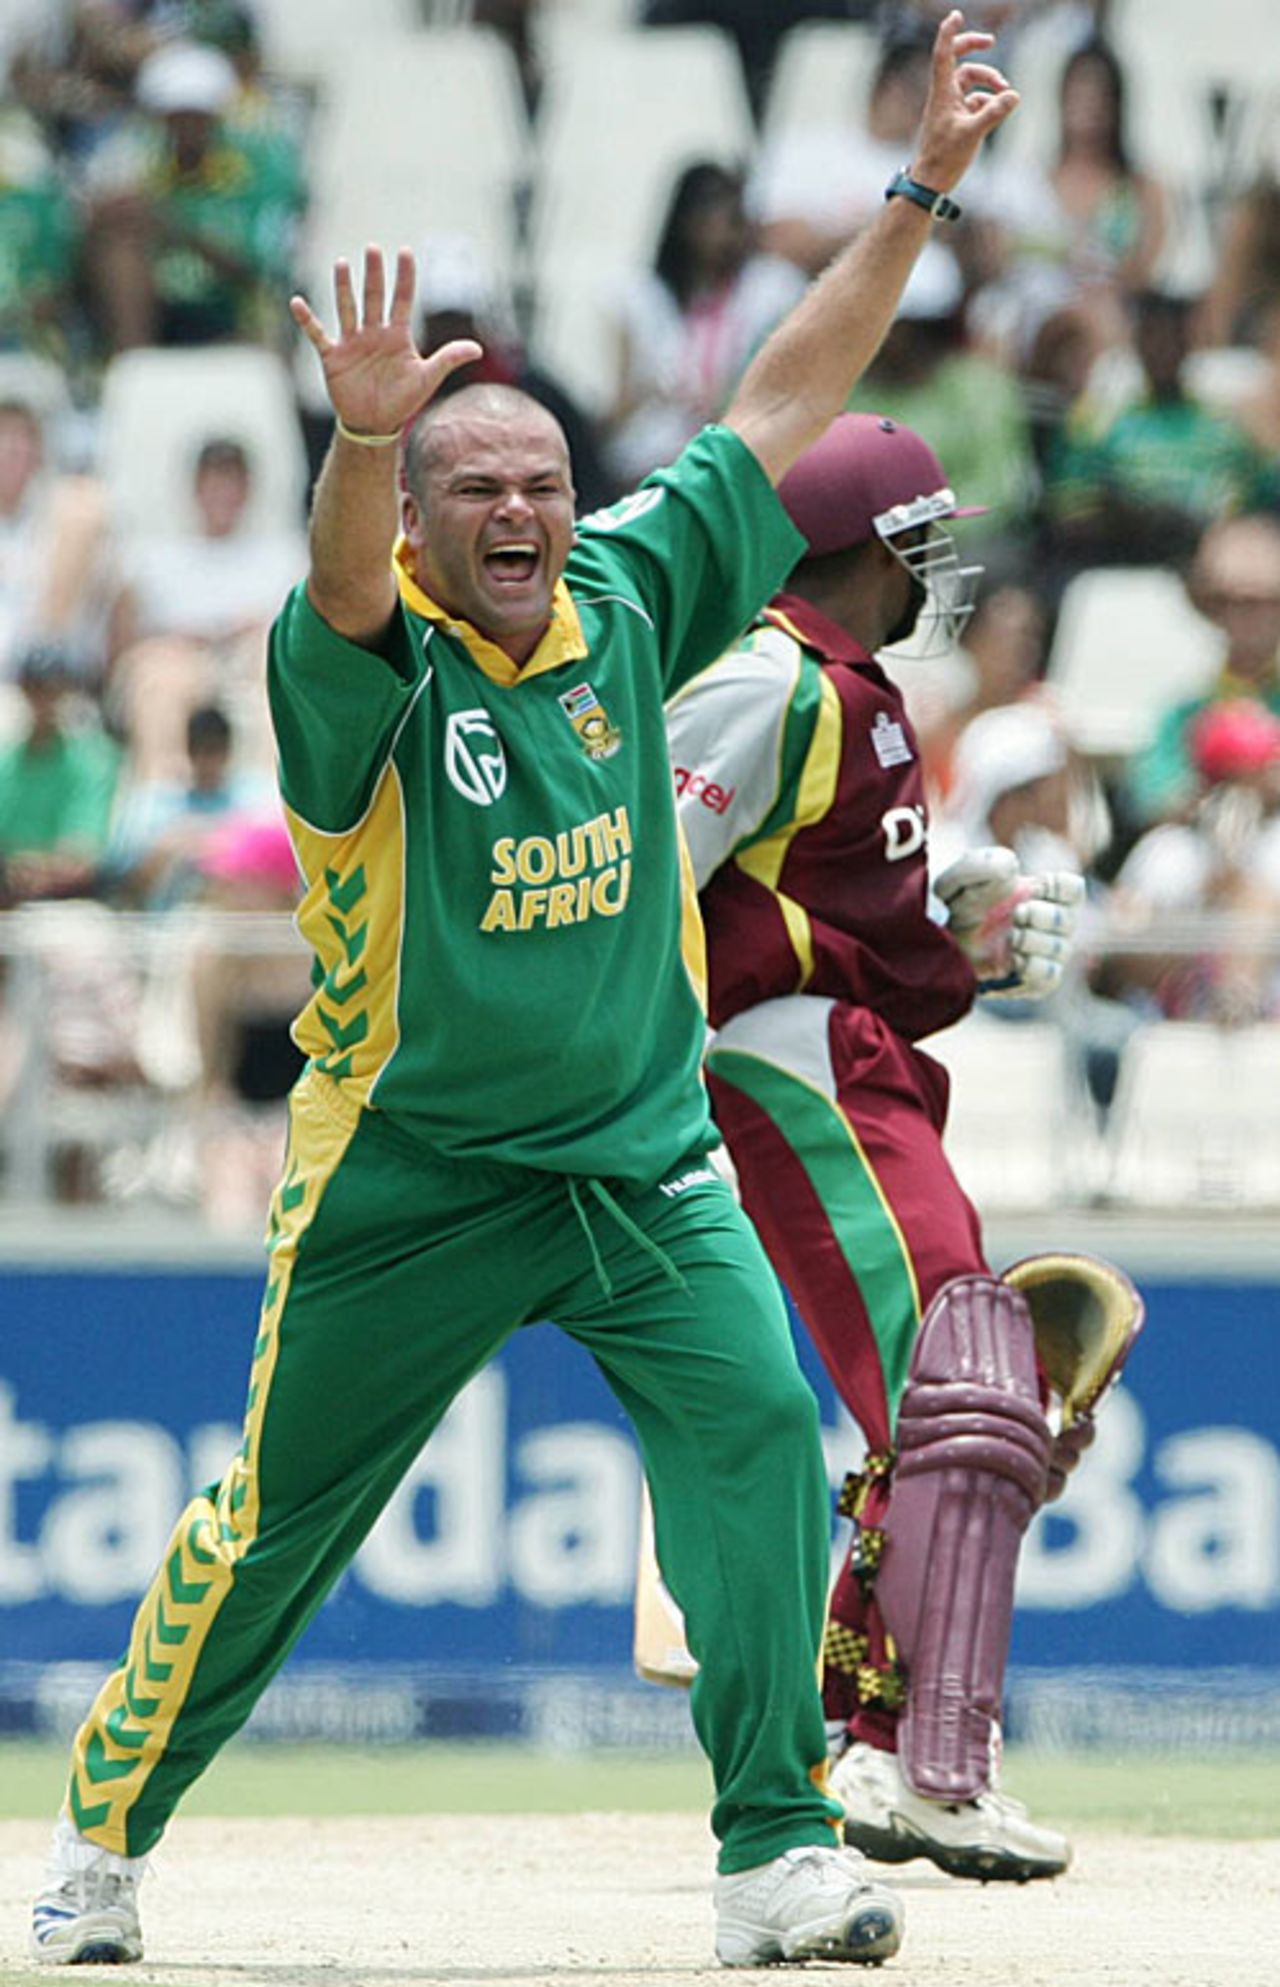 Charl Langeveldt appeals for one of his three wickets, South Africa v West Indies, 5th ODI, Johannesburg, February 3, 2008